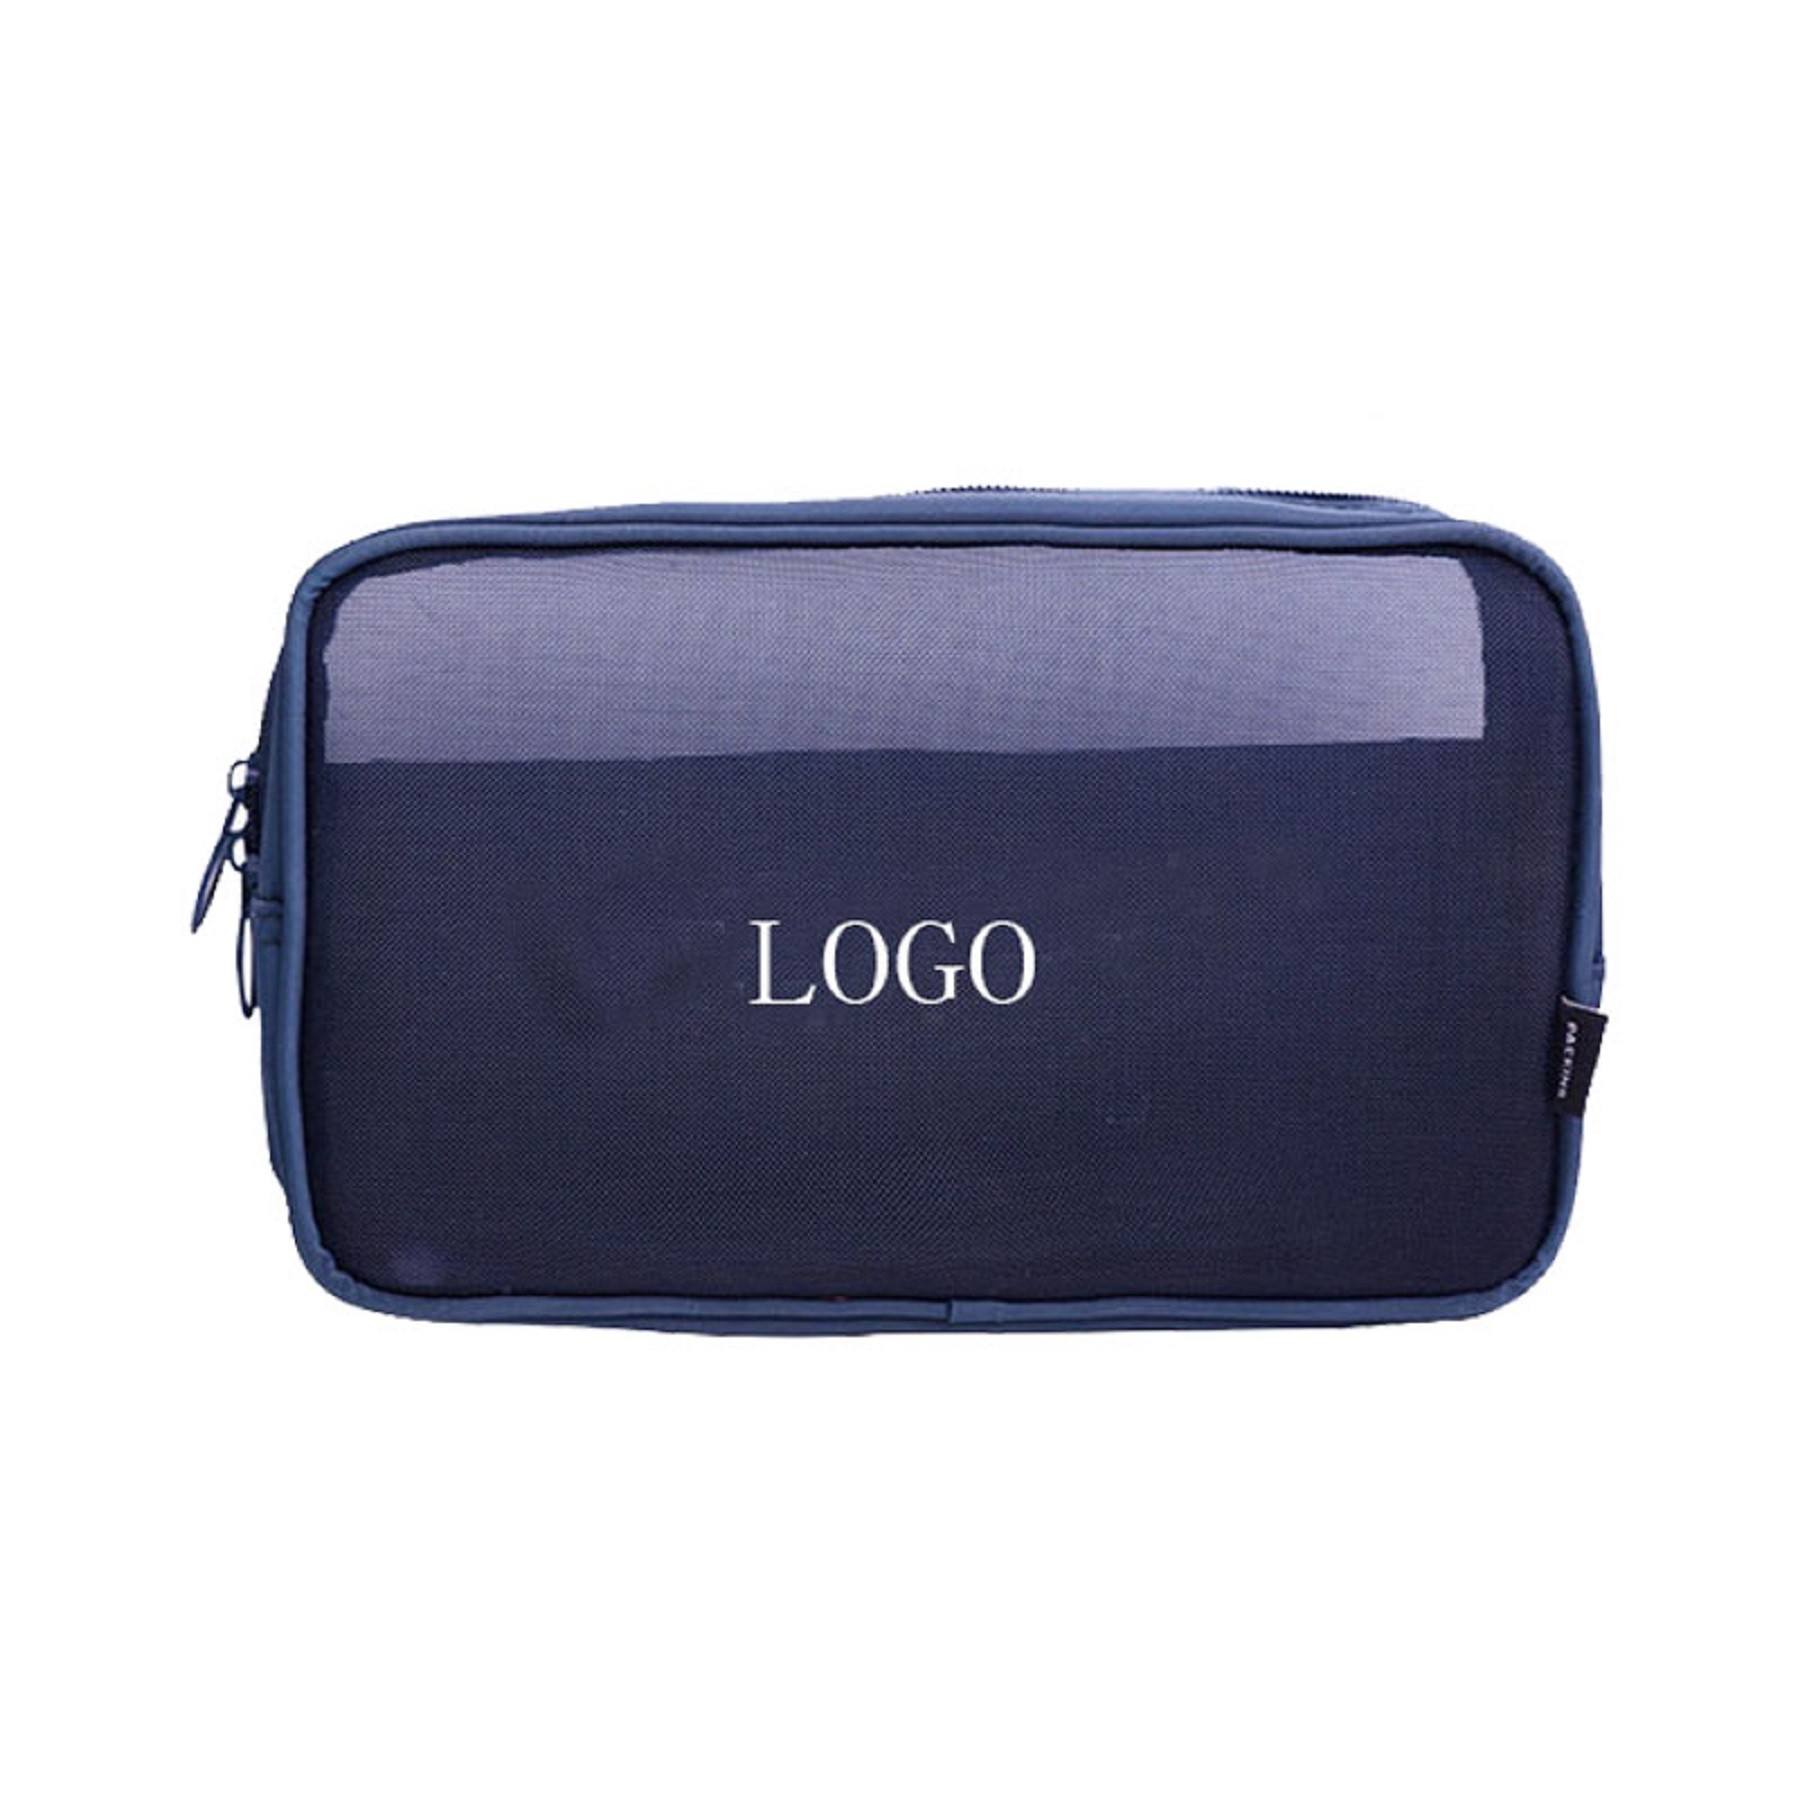 Mesh Travel Accessories Cosmetic Bag